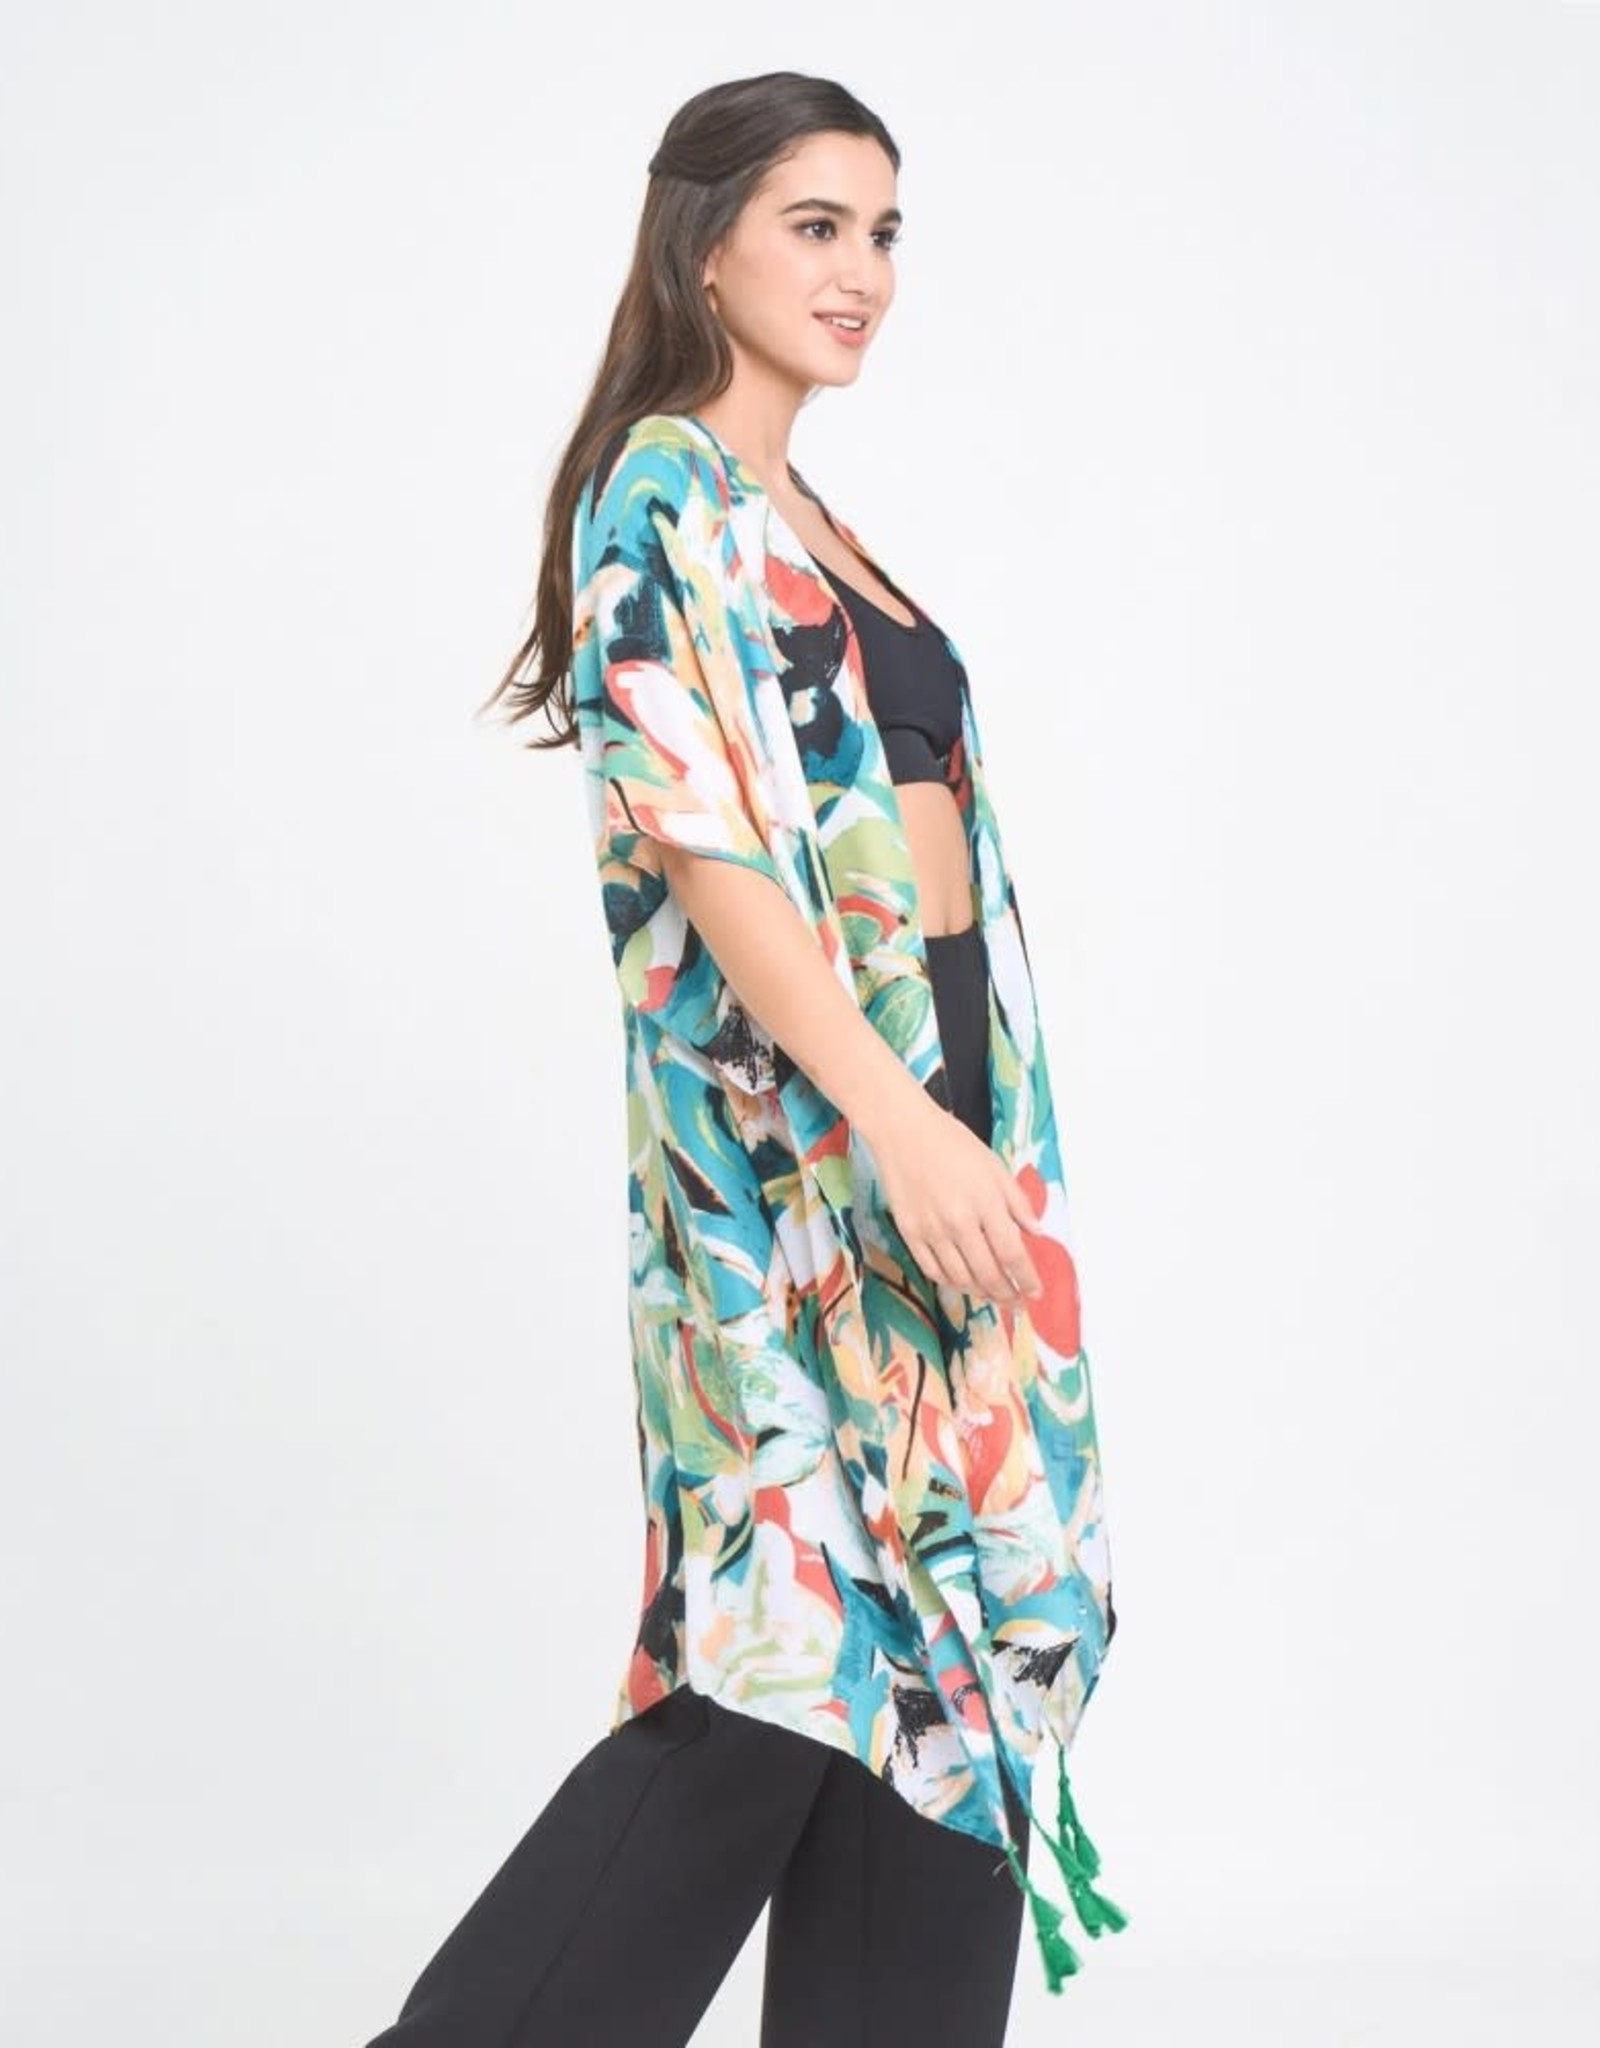 judson 7317026 - Do Everything In Love Abstract Print Kimono  - One Size - Green